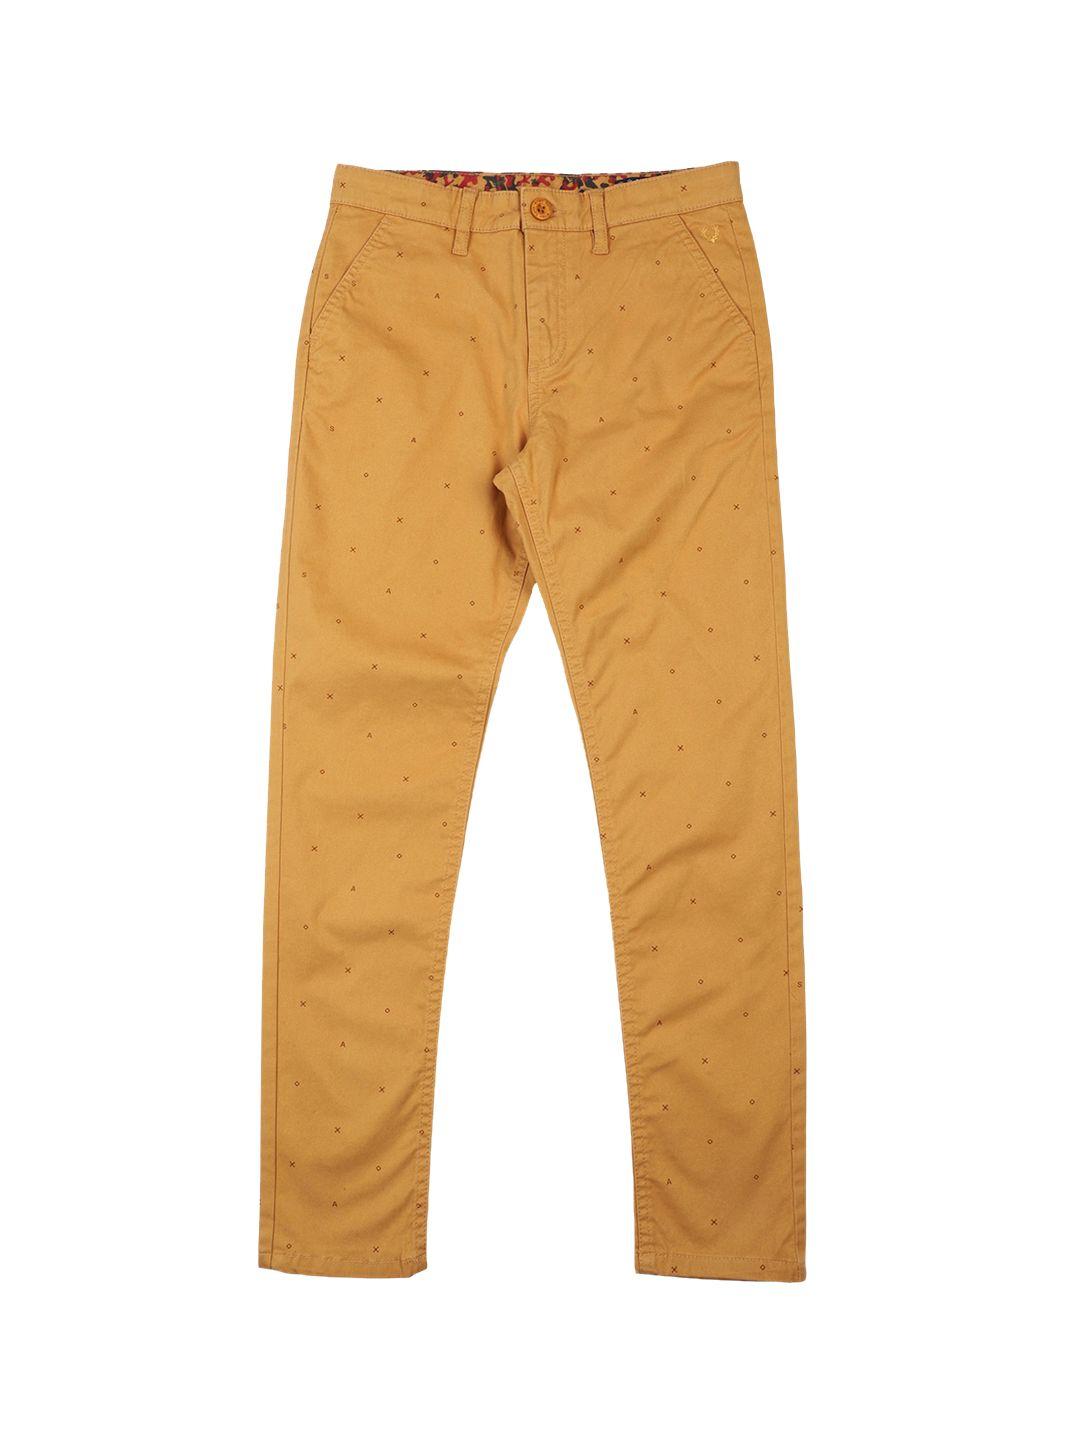 allen solly junior boys yellow printed slim fit trousers